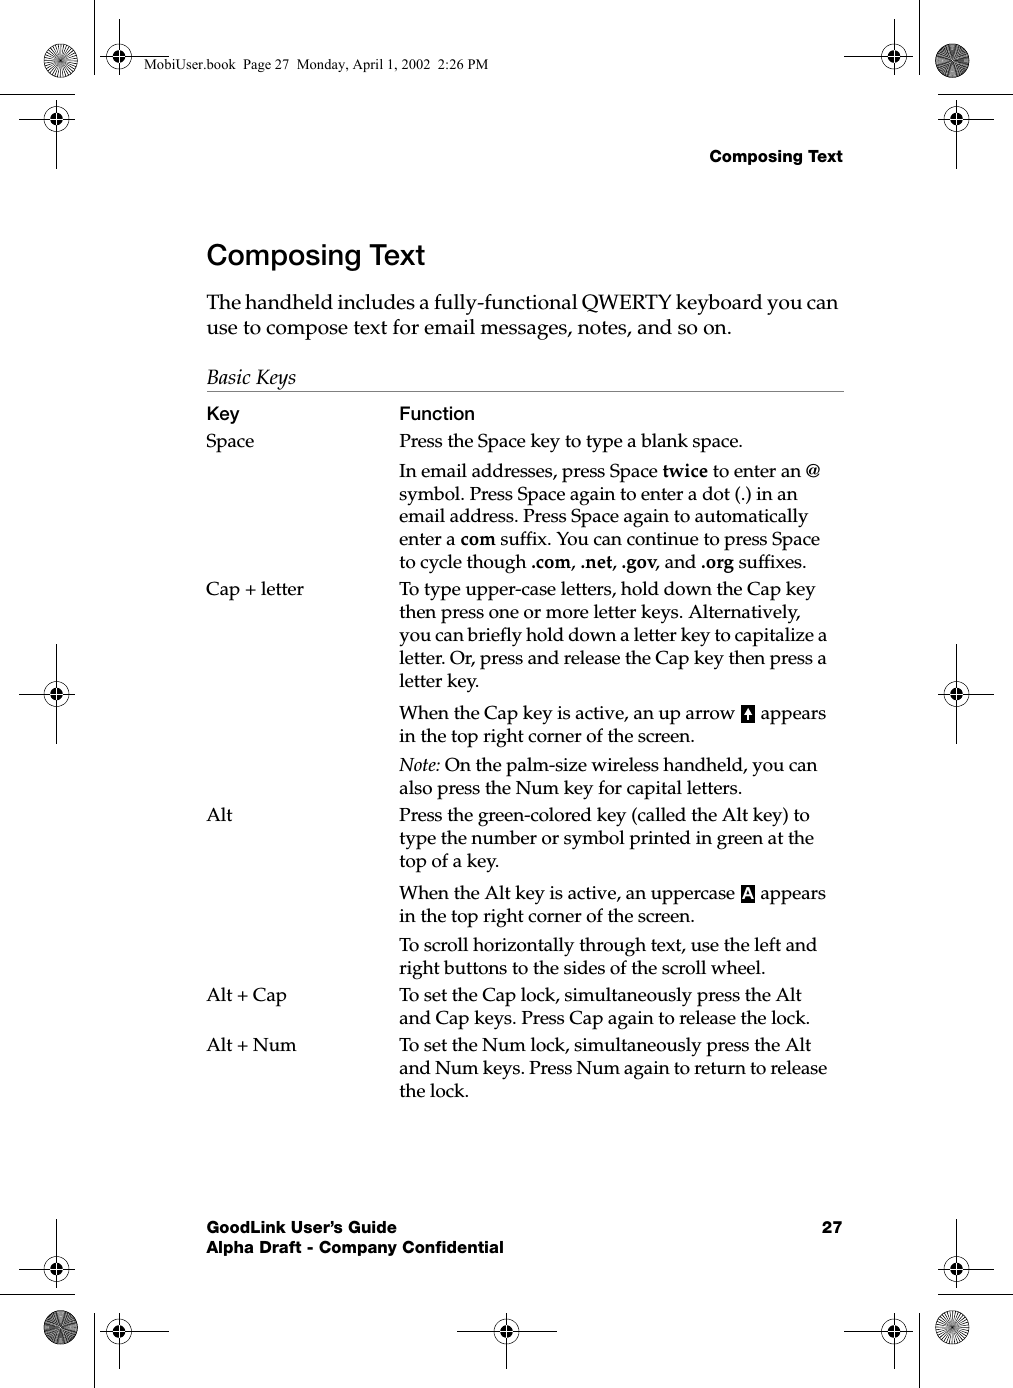 Composing TextGoodLink User’s Guide 27Alpha Draft - Company ConfidentialComposing TextThe handheld includes a fully-functional QWERTY keyboard you can use to compose text for email messages, notes, and so on.Basic KeysKey FunctionSpace Press the Space key to type a blank space.In email addresses, press Space twice to enter an @ symbol. Press Space again to enter a dot (.) in an email address. Press Space again to automatically enter a com suffix. You can continue to press Space to cycle though .com, .net, .gov, and .org suffixes.Cap + letter To type upper-case letters, hold down the Cap key then press one or more letter keys. Alternatively, you can briefly hold down a letter key to capitalize a letter. Or, press and release the Cap key then press a letter key.When the Cap key is active, an up arrow   appears in the top right corner of the screen.Note: On the palm-size wireless handheld, you can also press the Num key for capital letters.Alt  Press the green-colored key (called the Alt key) to type the number or symbol printed in green at the top of a key.When the Alt key is active, an uppercase   appears in the top right corner of the screen.To scroll horizontally through text, use the left and right buttons to the sides of the scroll wheel.Alt + Cap To set the Cap lock, simultaneously press the Alt and Cap keys. Press Cap again to release the lock.Alt + Num To set the Num lock, simultaneously press the Alt and Num keys. Press Num again to return to release the lock.AMobiUser.book  Page 27  Monday, April 1, 2002  2:26 PM